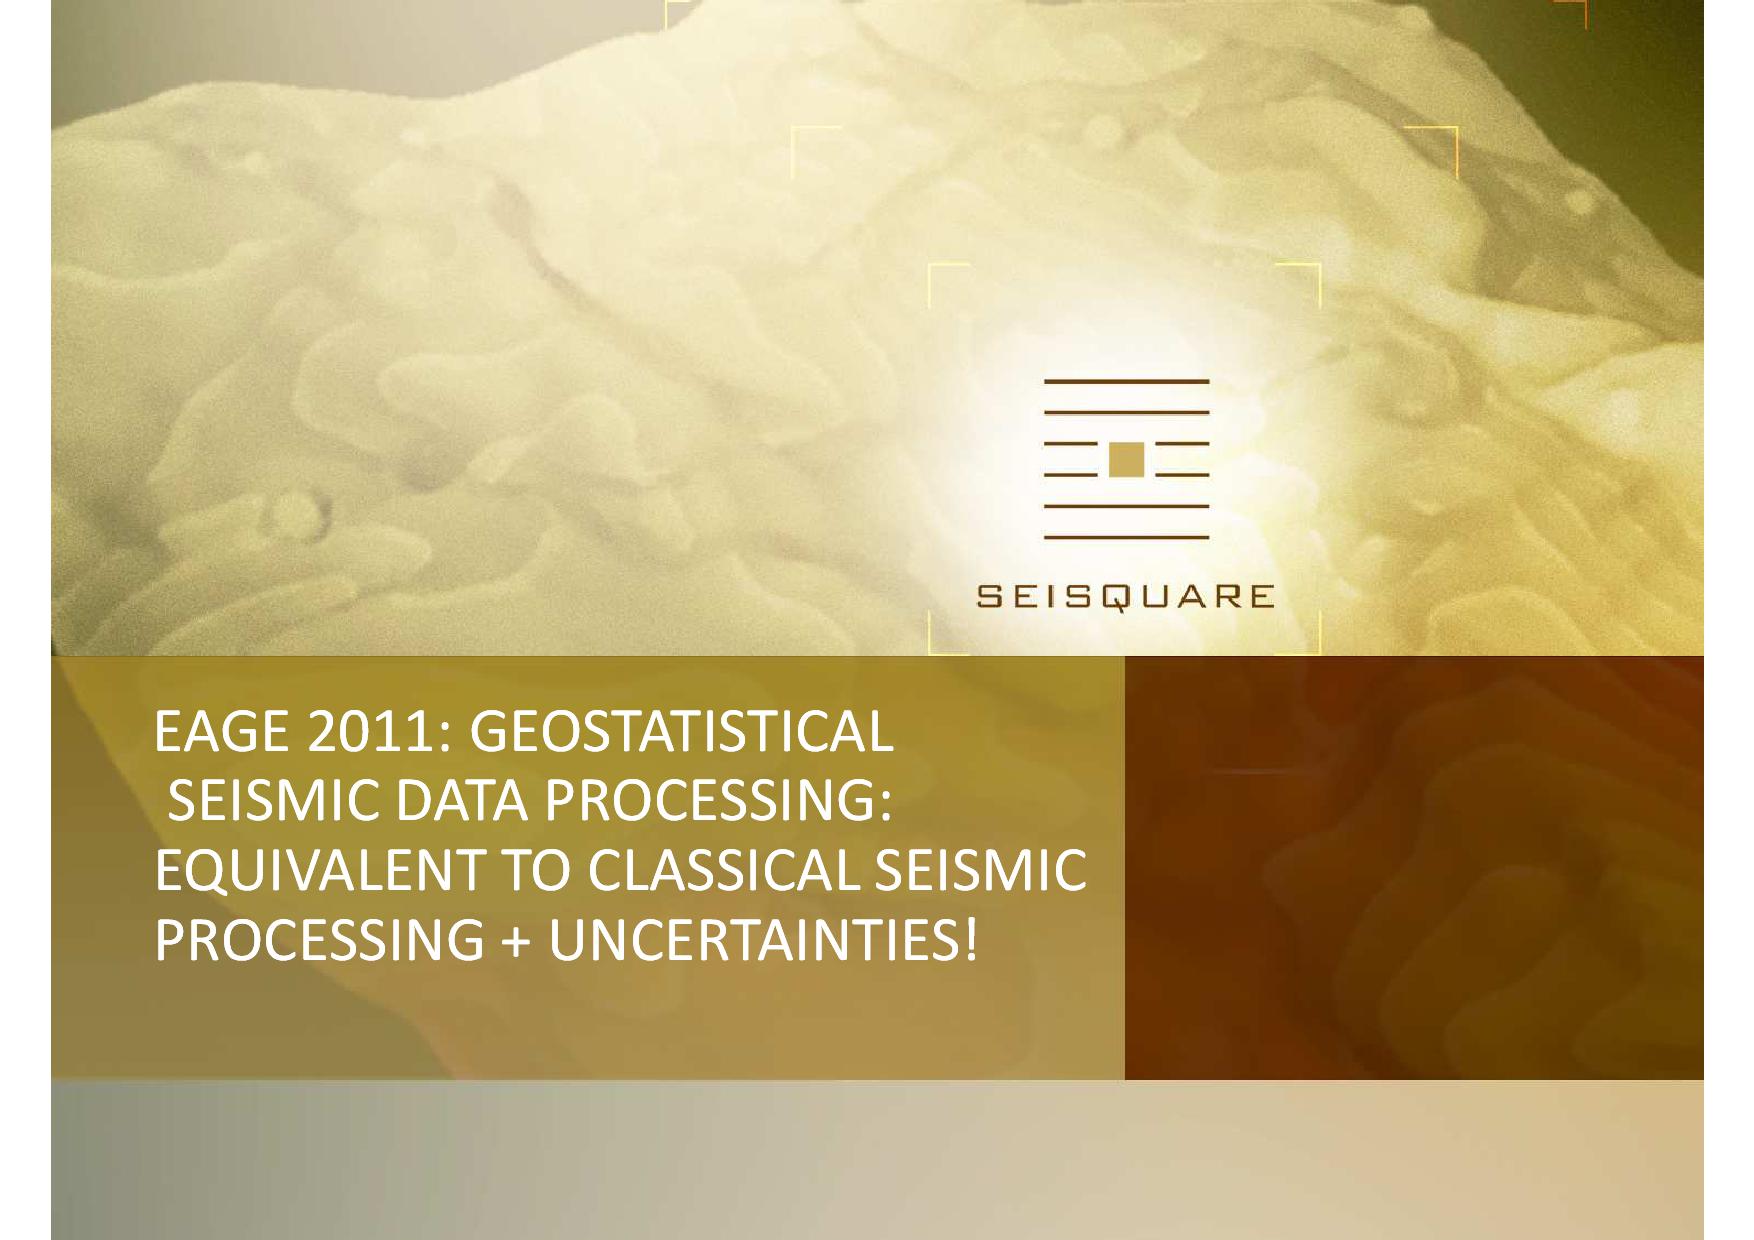 EAGE 2011 GEOSTATISTICAL SEISMIC DATA PROCESSING EQUIVALENT TO CLASSICAL SEISMIC PROCESSING UNCERTAINTIES